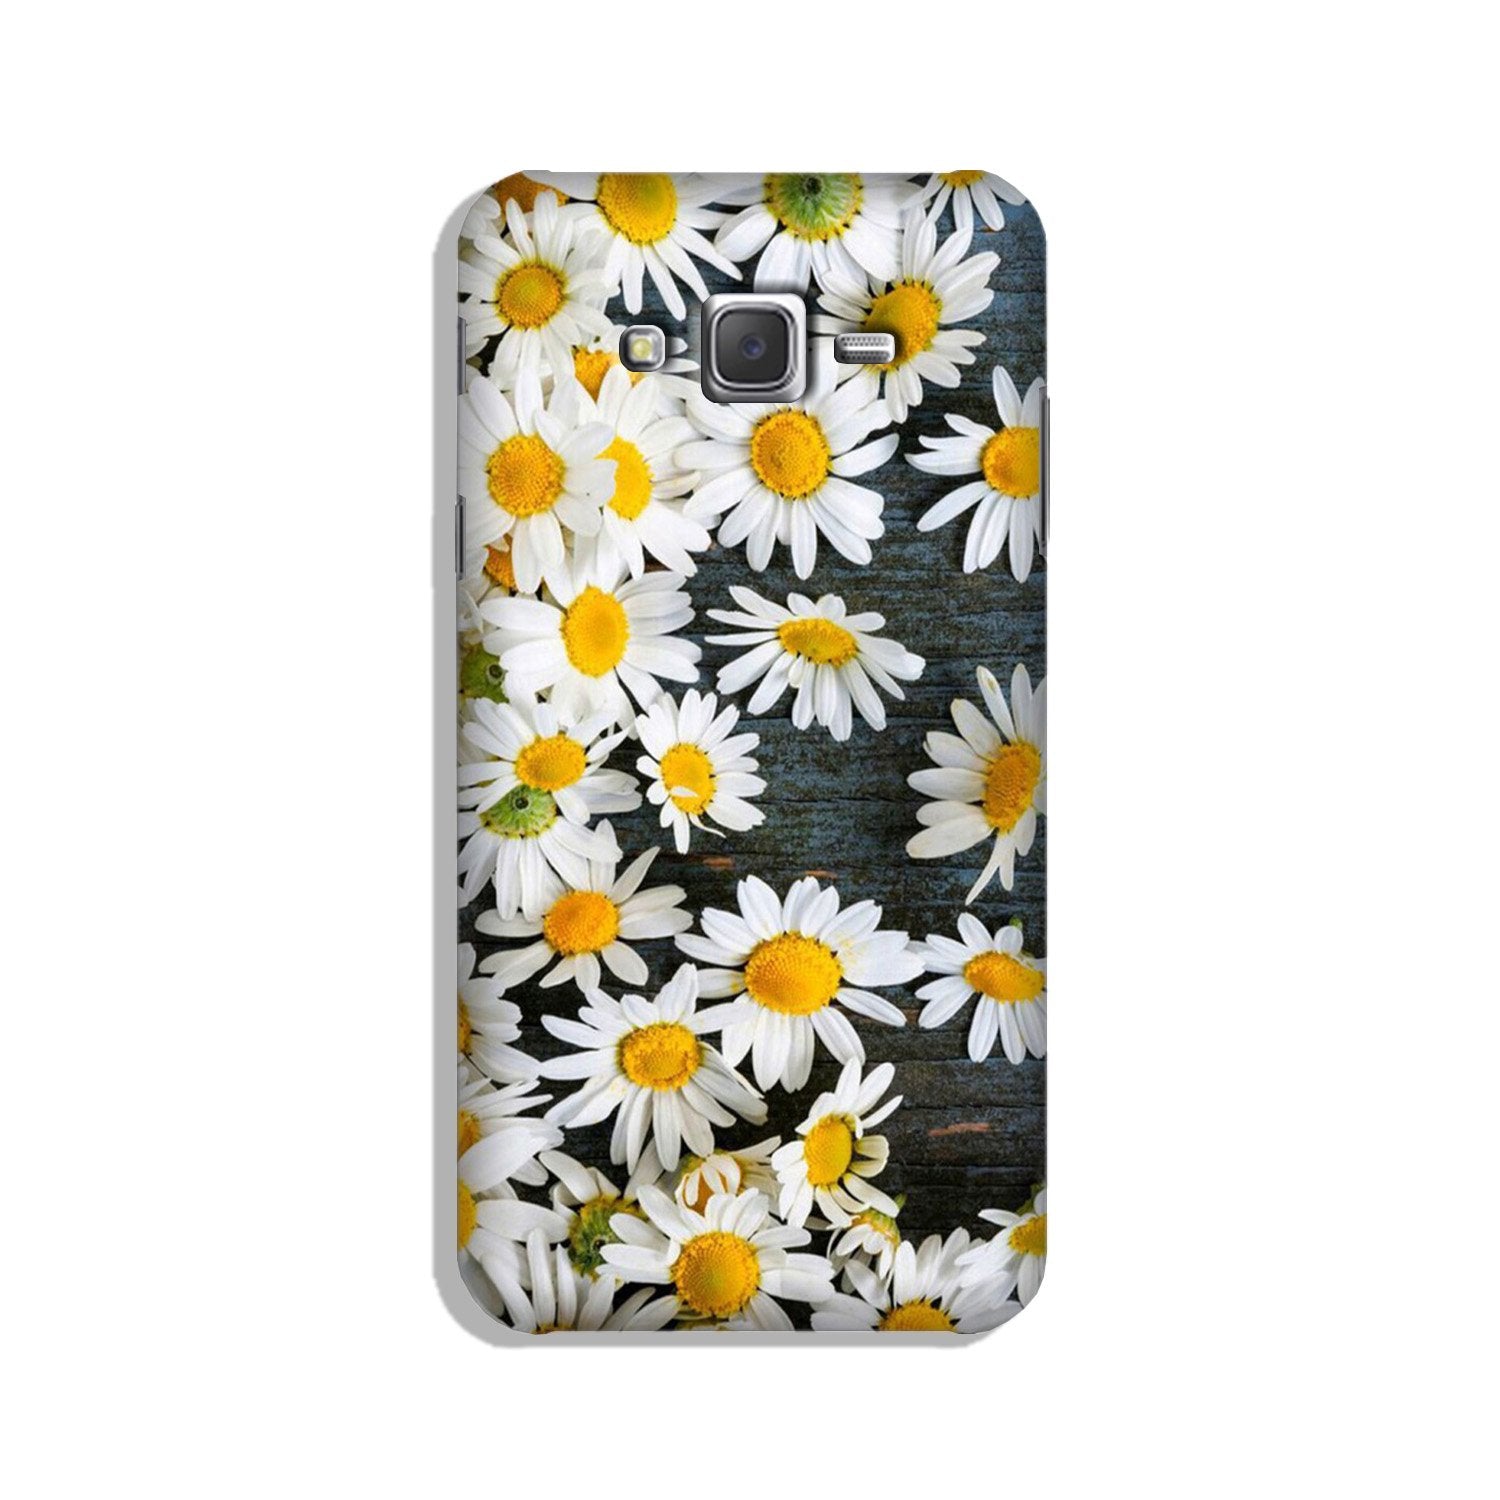 White flowers2 Case for Galaxy J5 (2015)